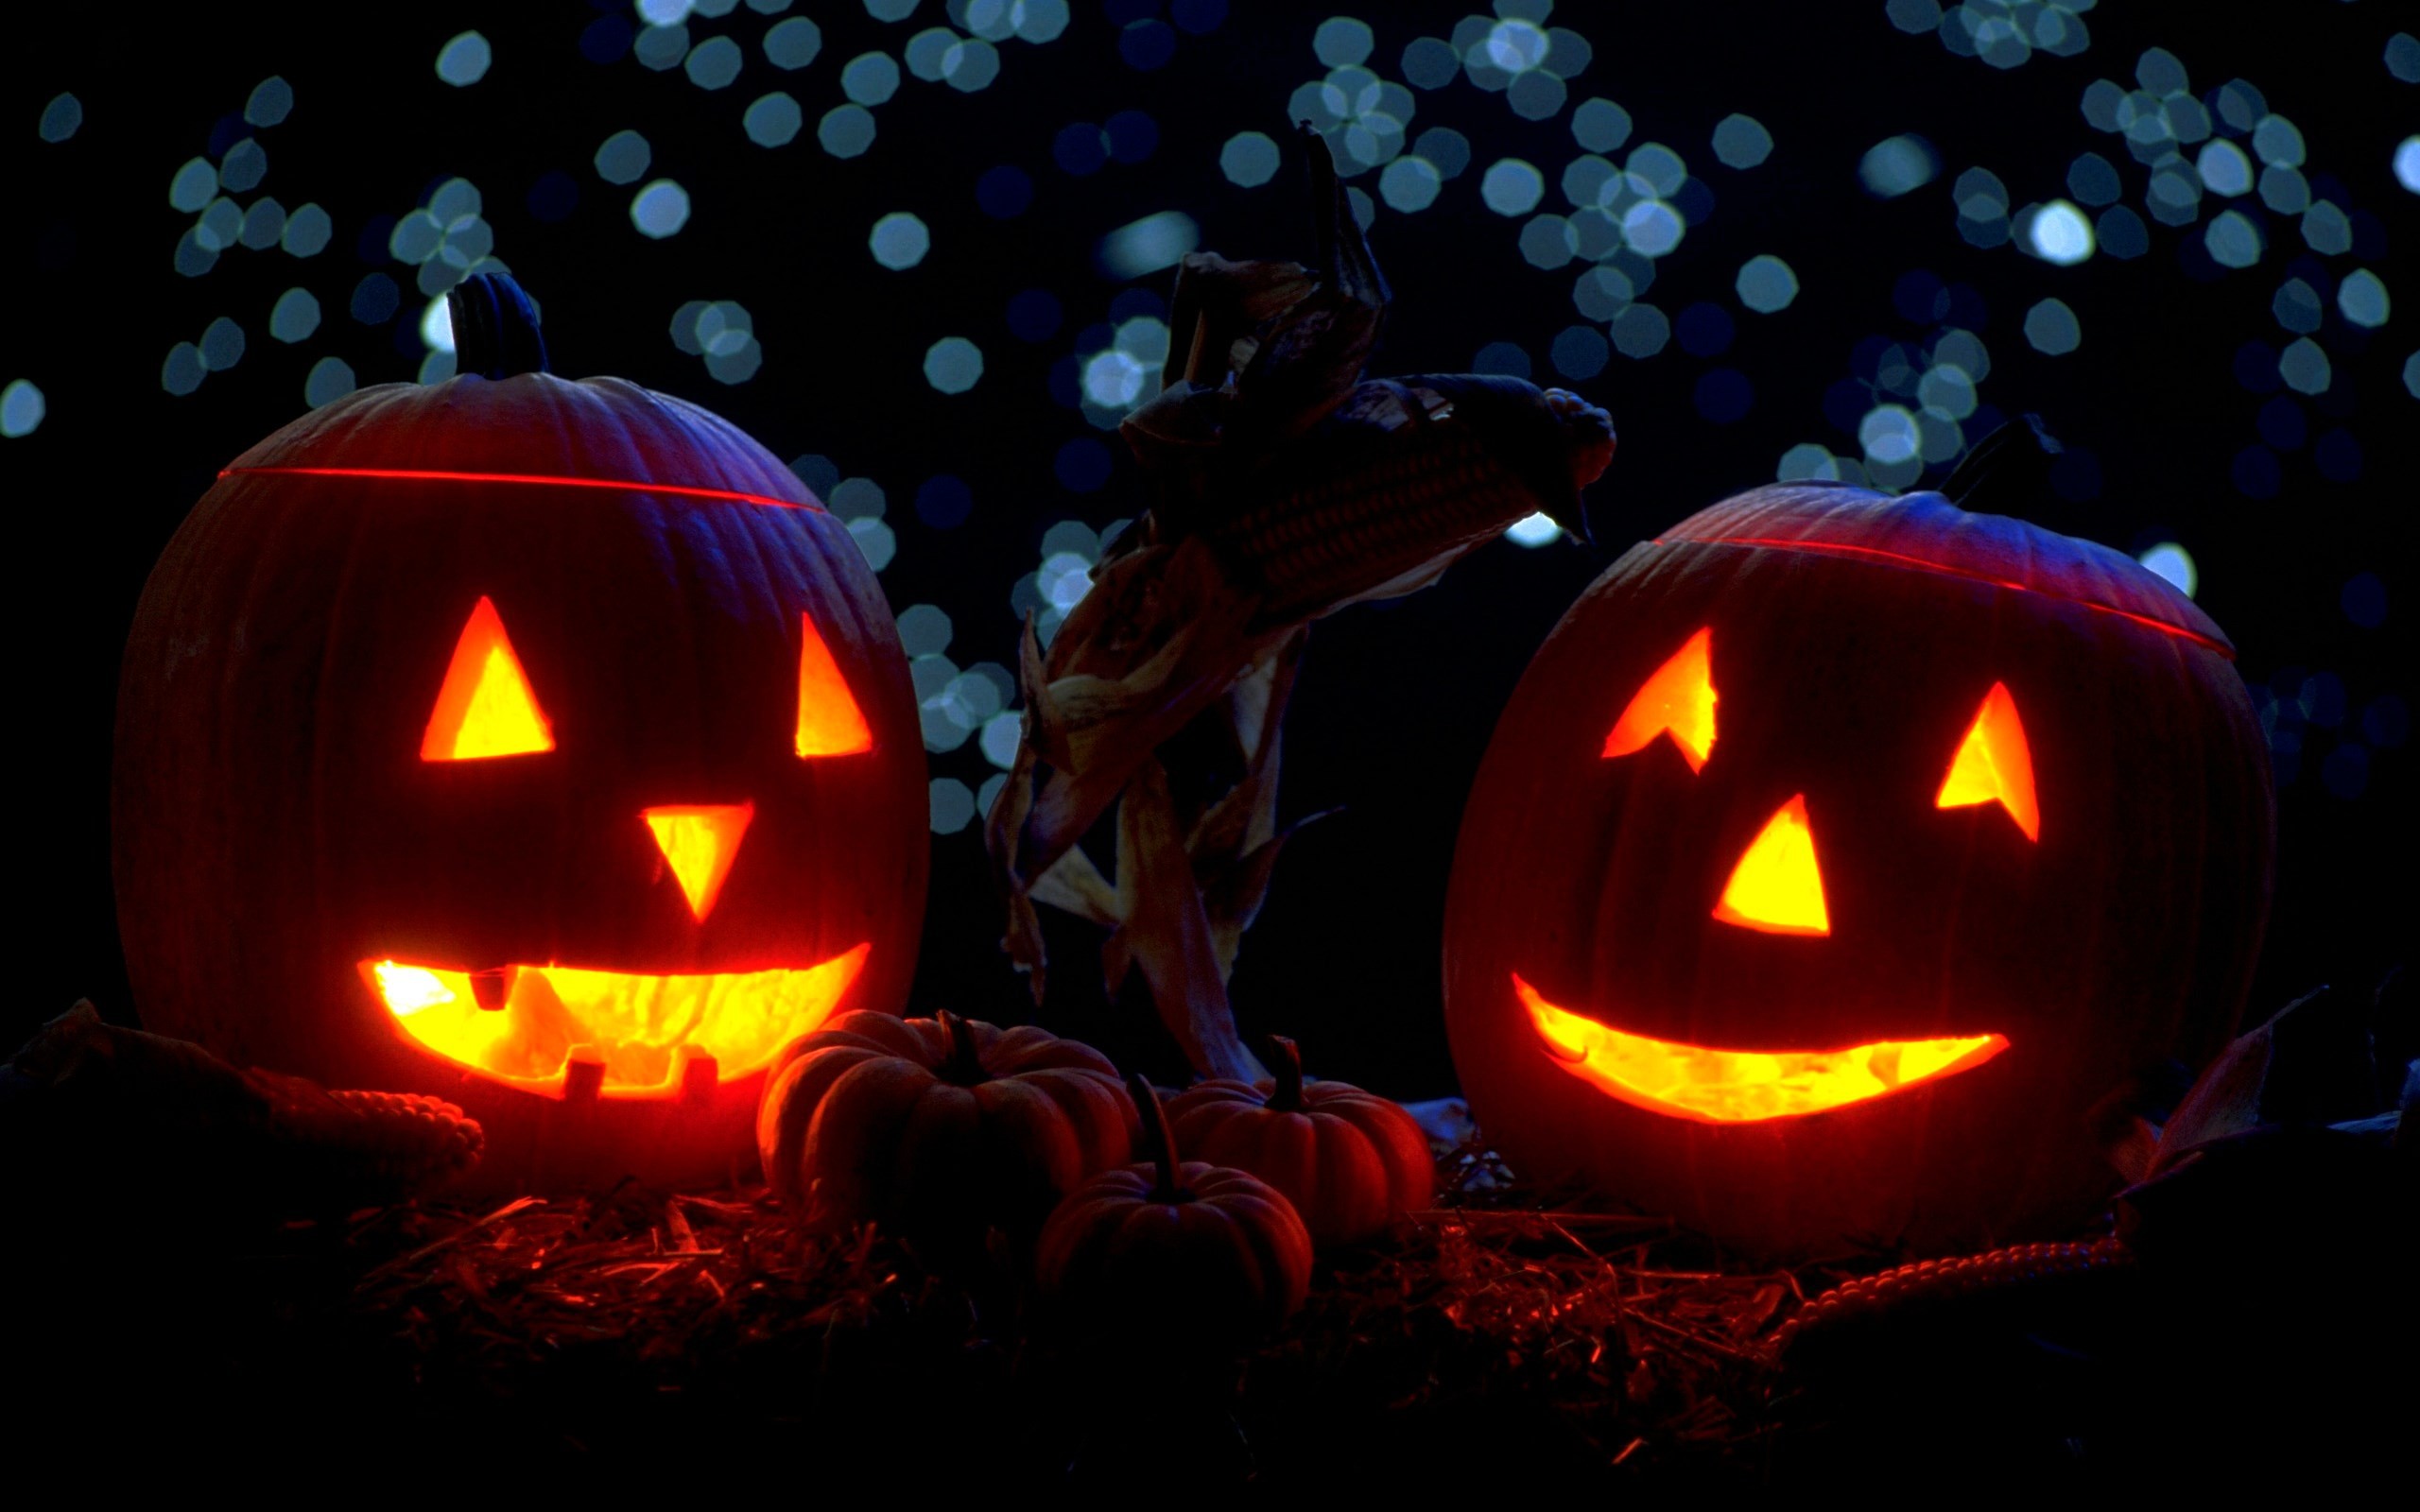 2560x1600 Pumpkins with candles in the night halloween widescreen images.